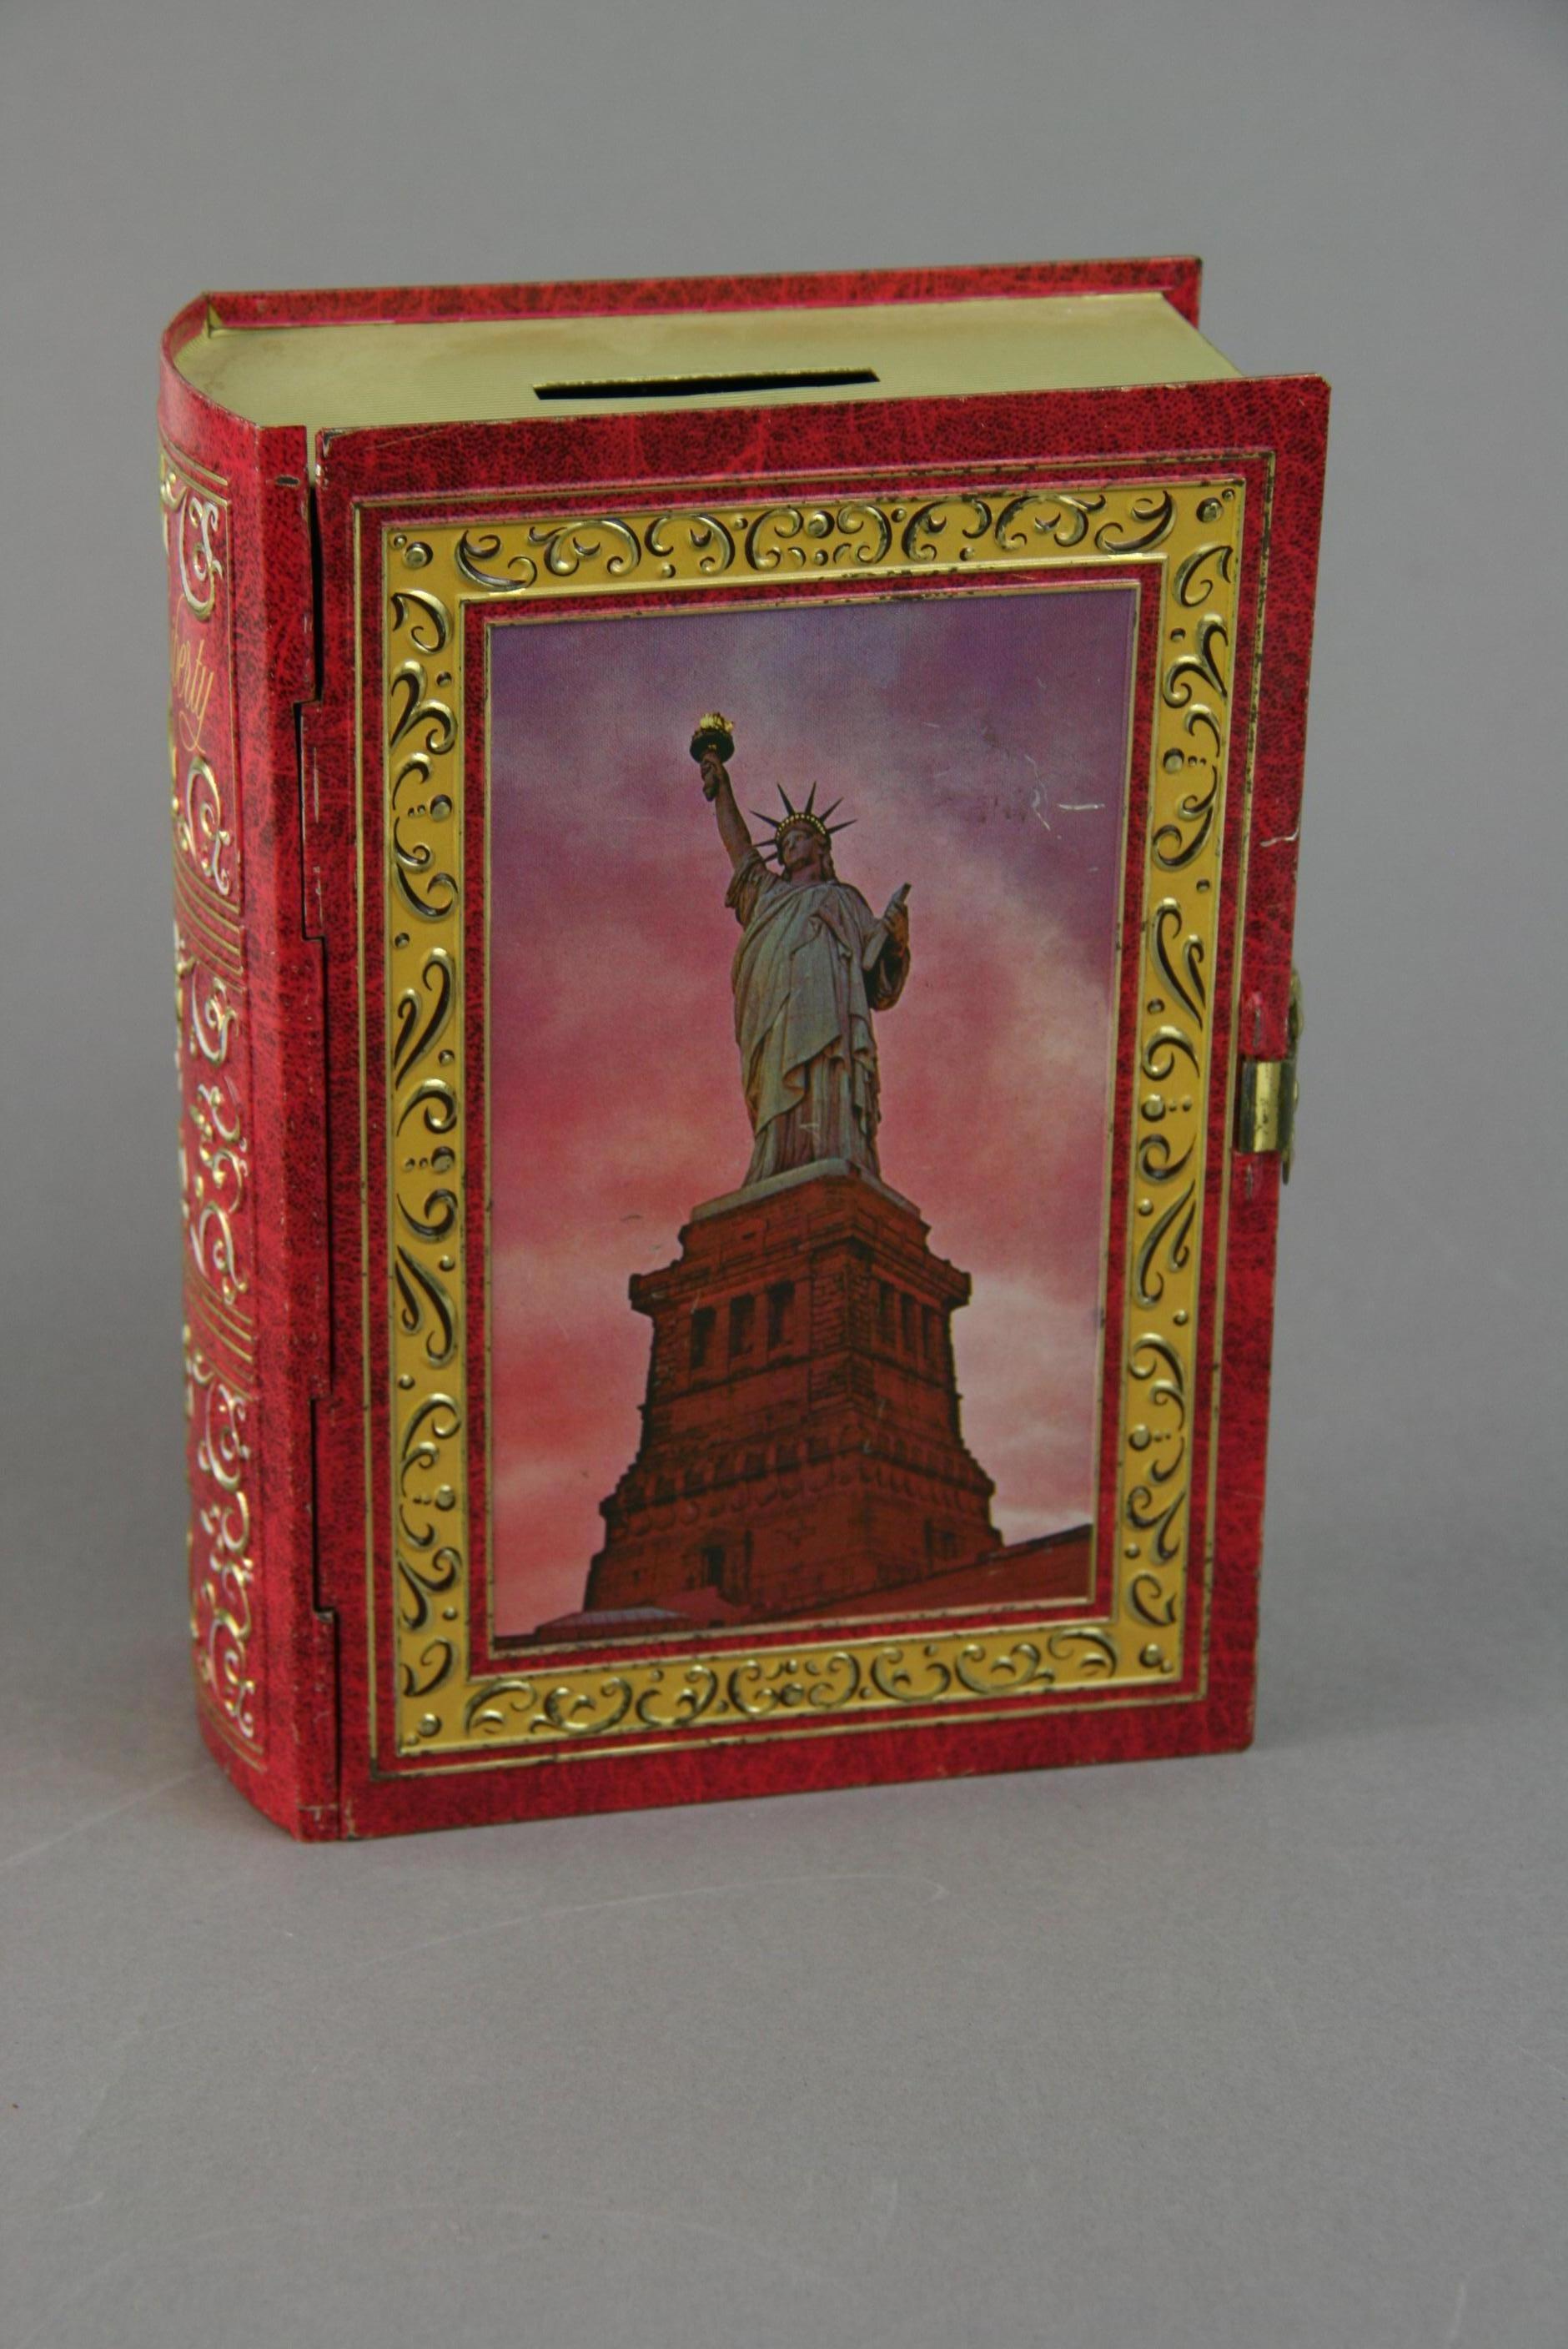 3-378 tin Liberty book bank made by Klann in Western Germany, 1970.